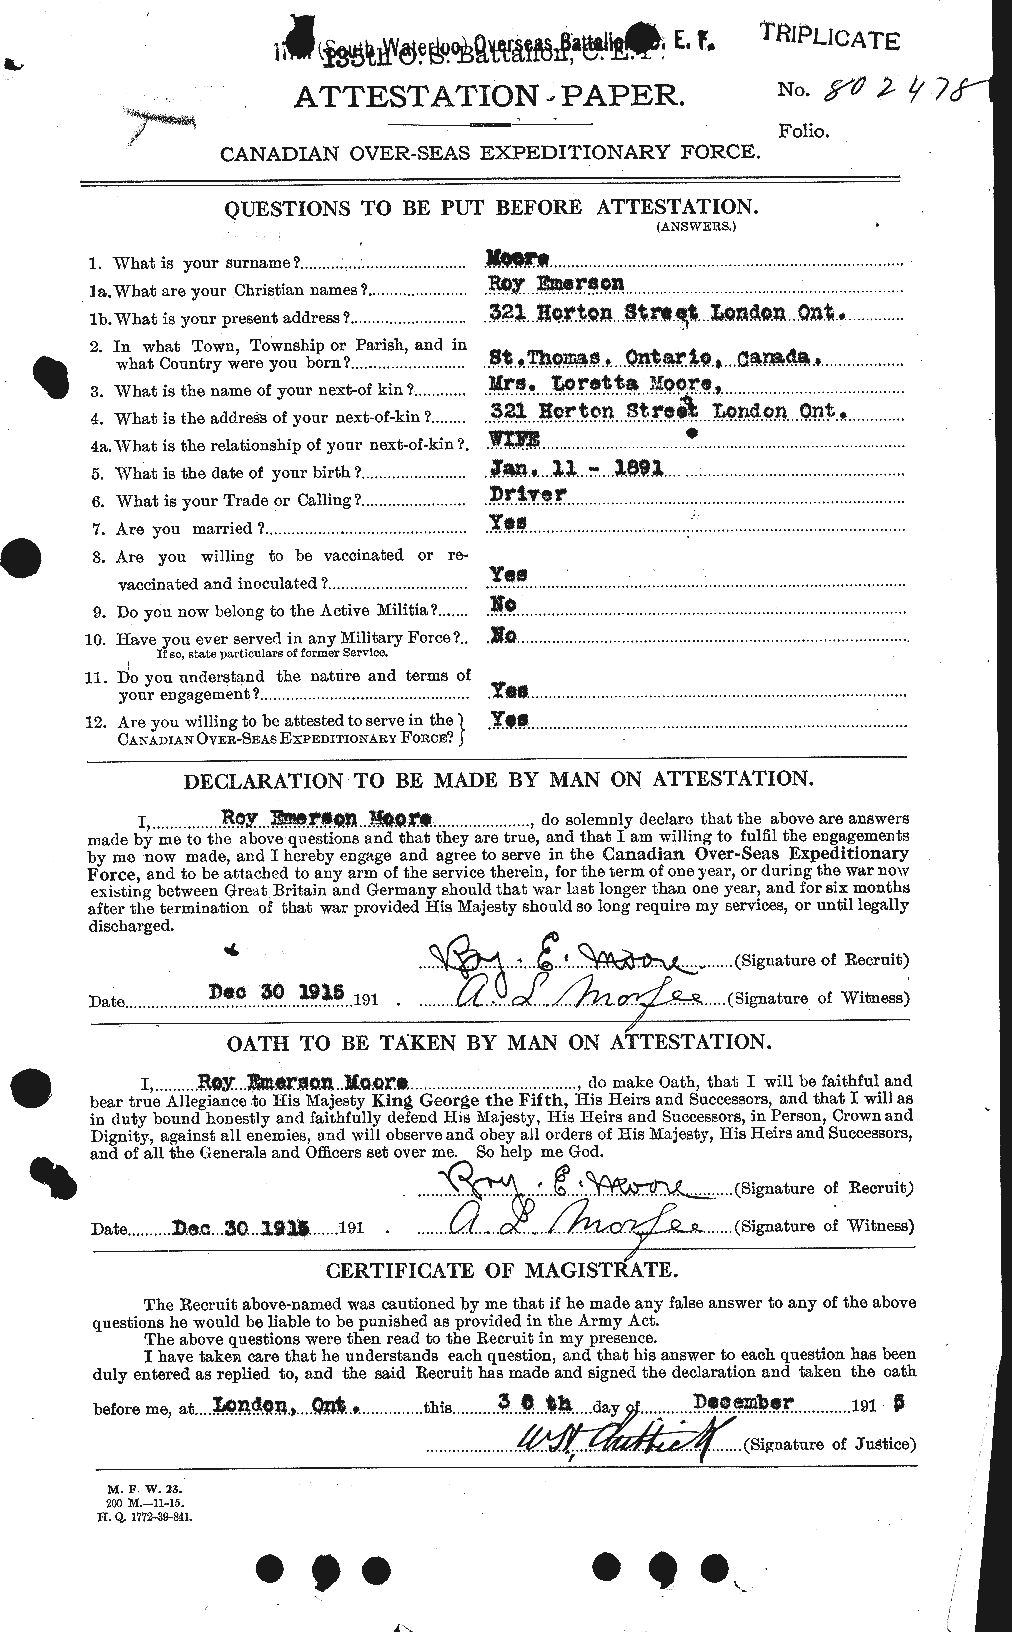 Personnel Records of the First World War - CEF 503598a